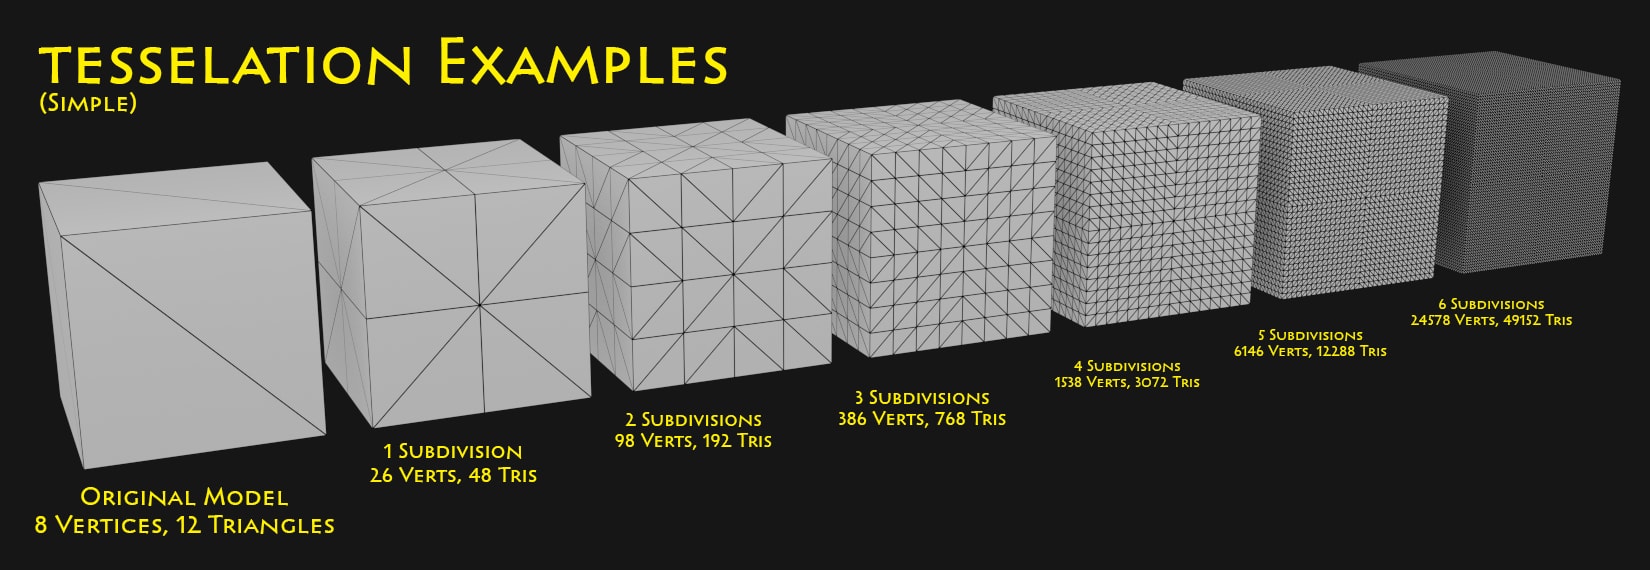 Tessellation overview